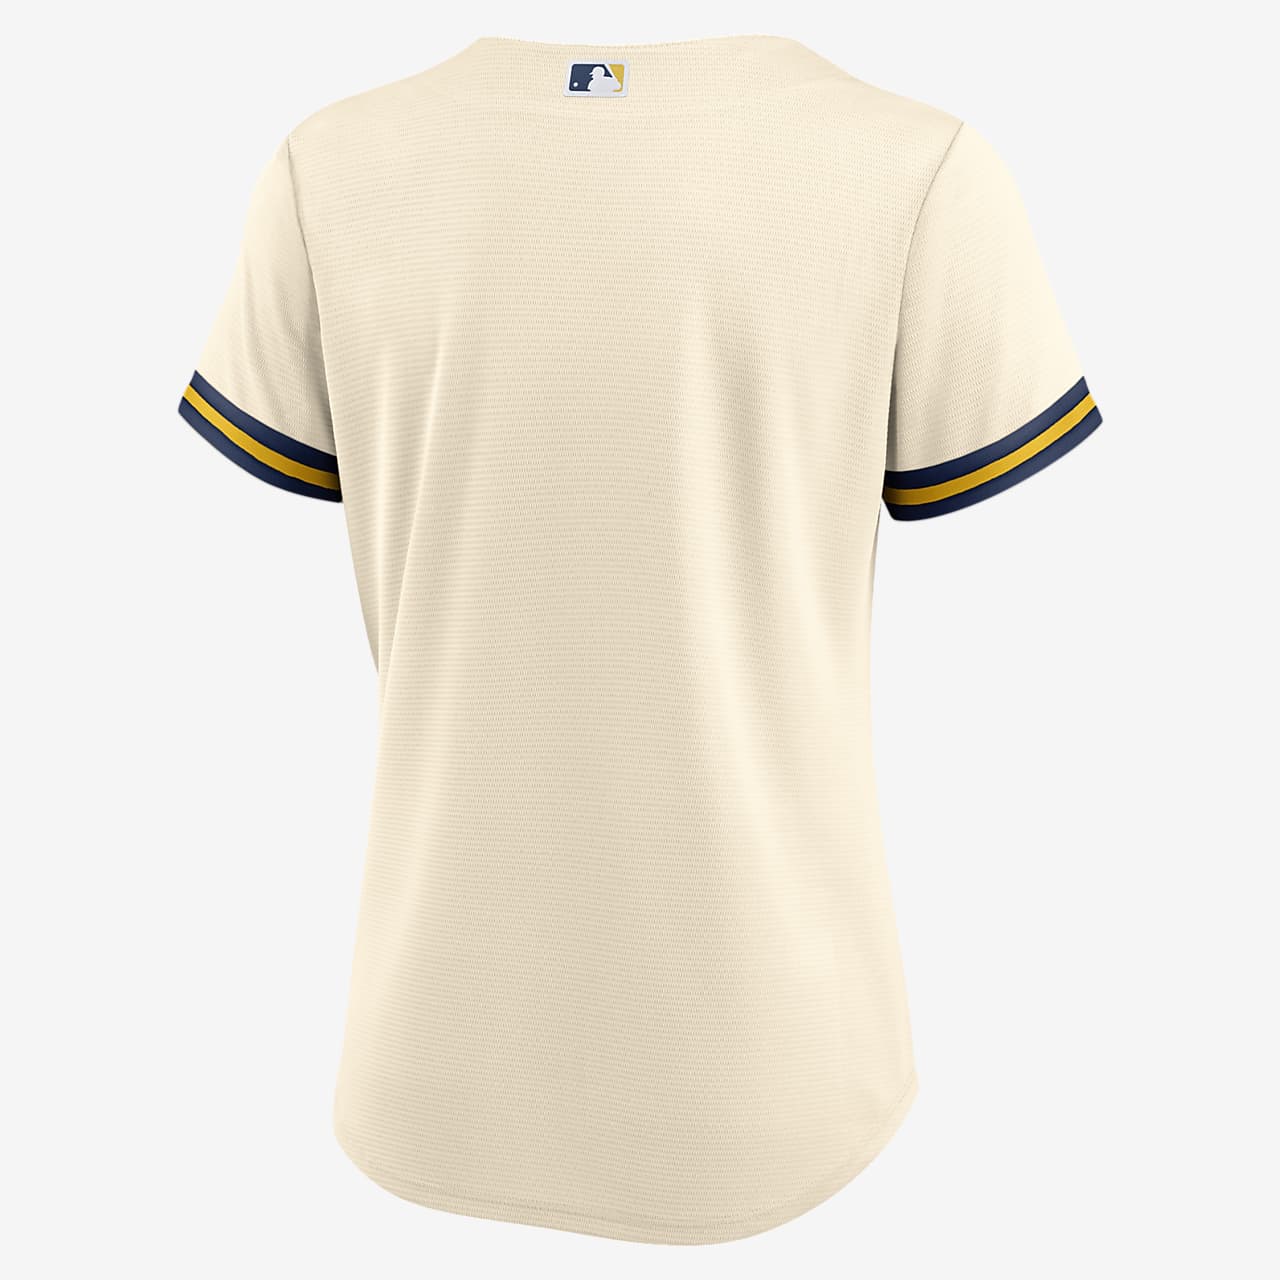 brewers jersey womens